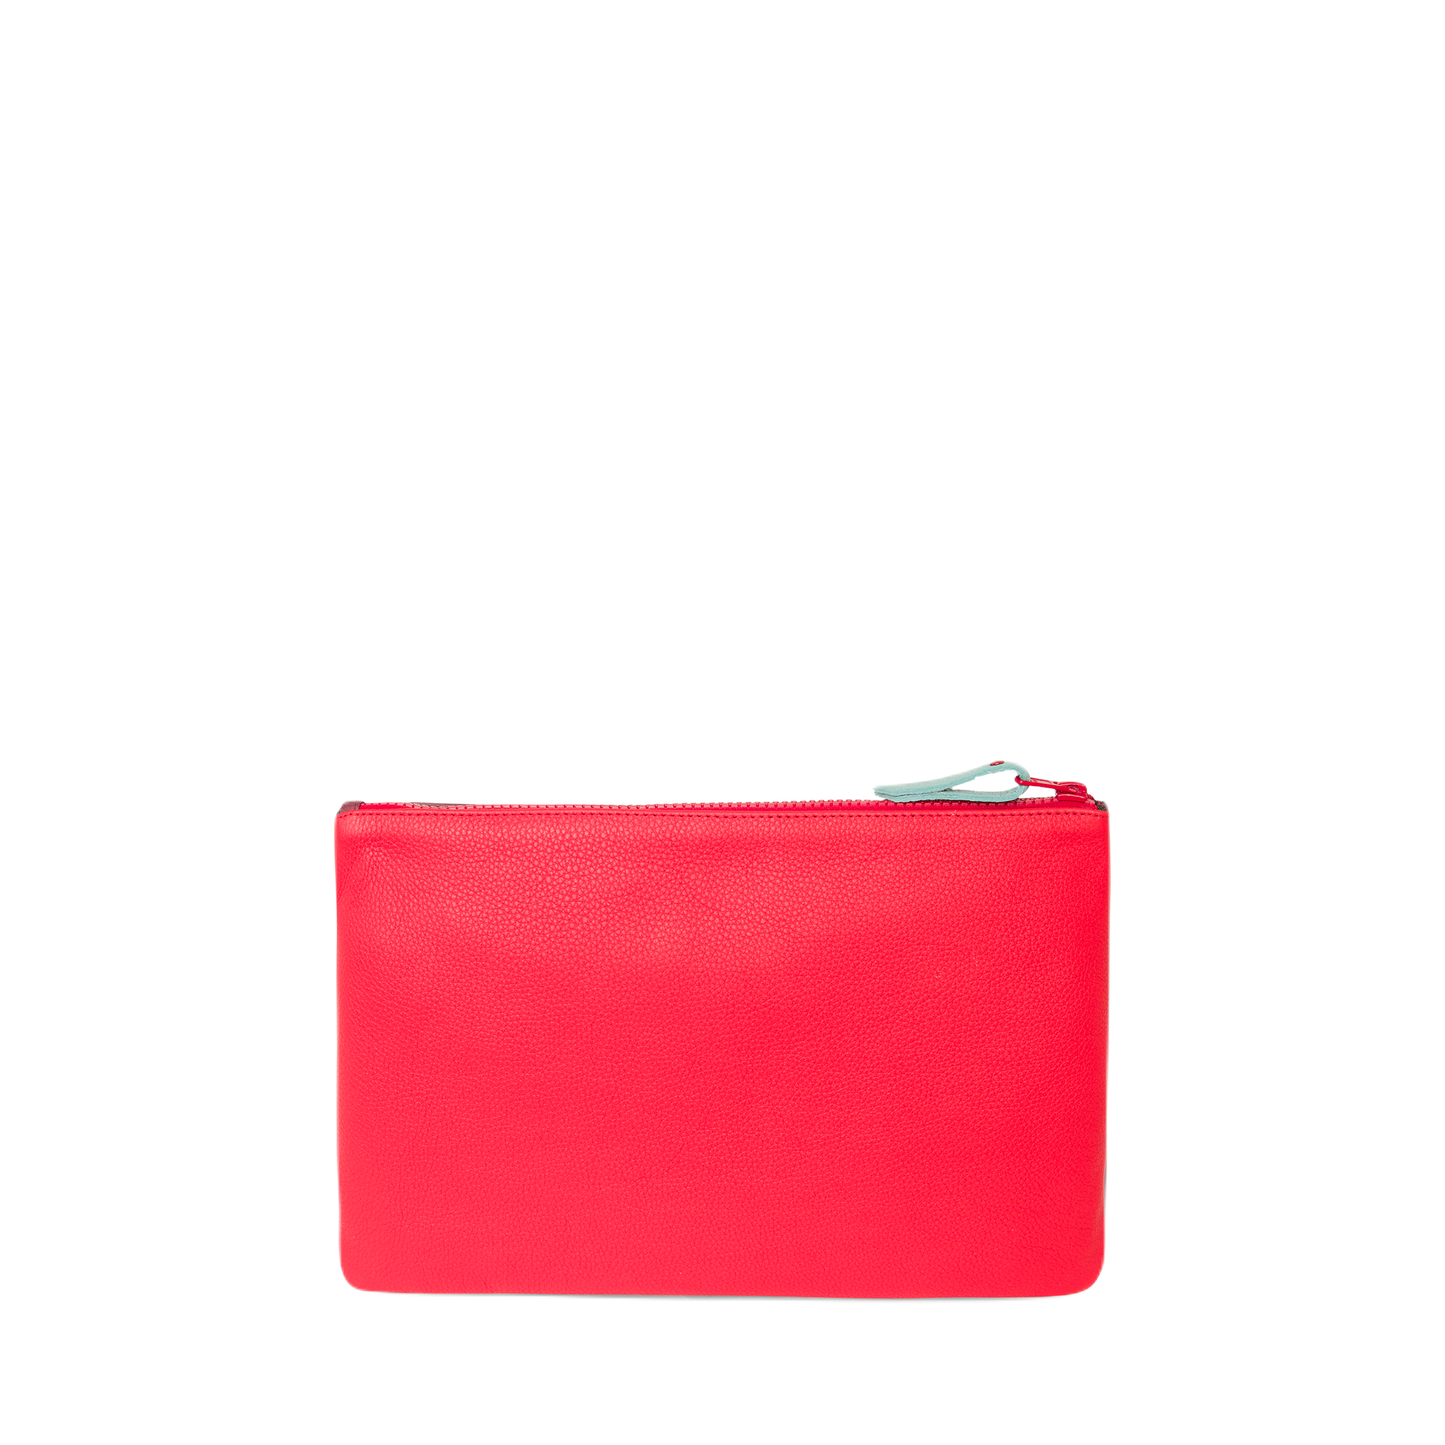 ZIP POUCH Maroon and red - S